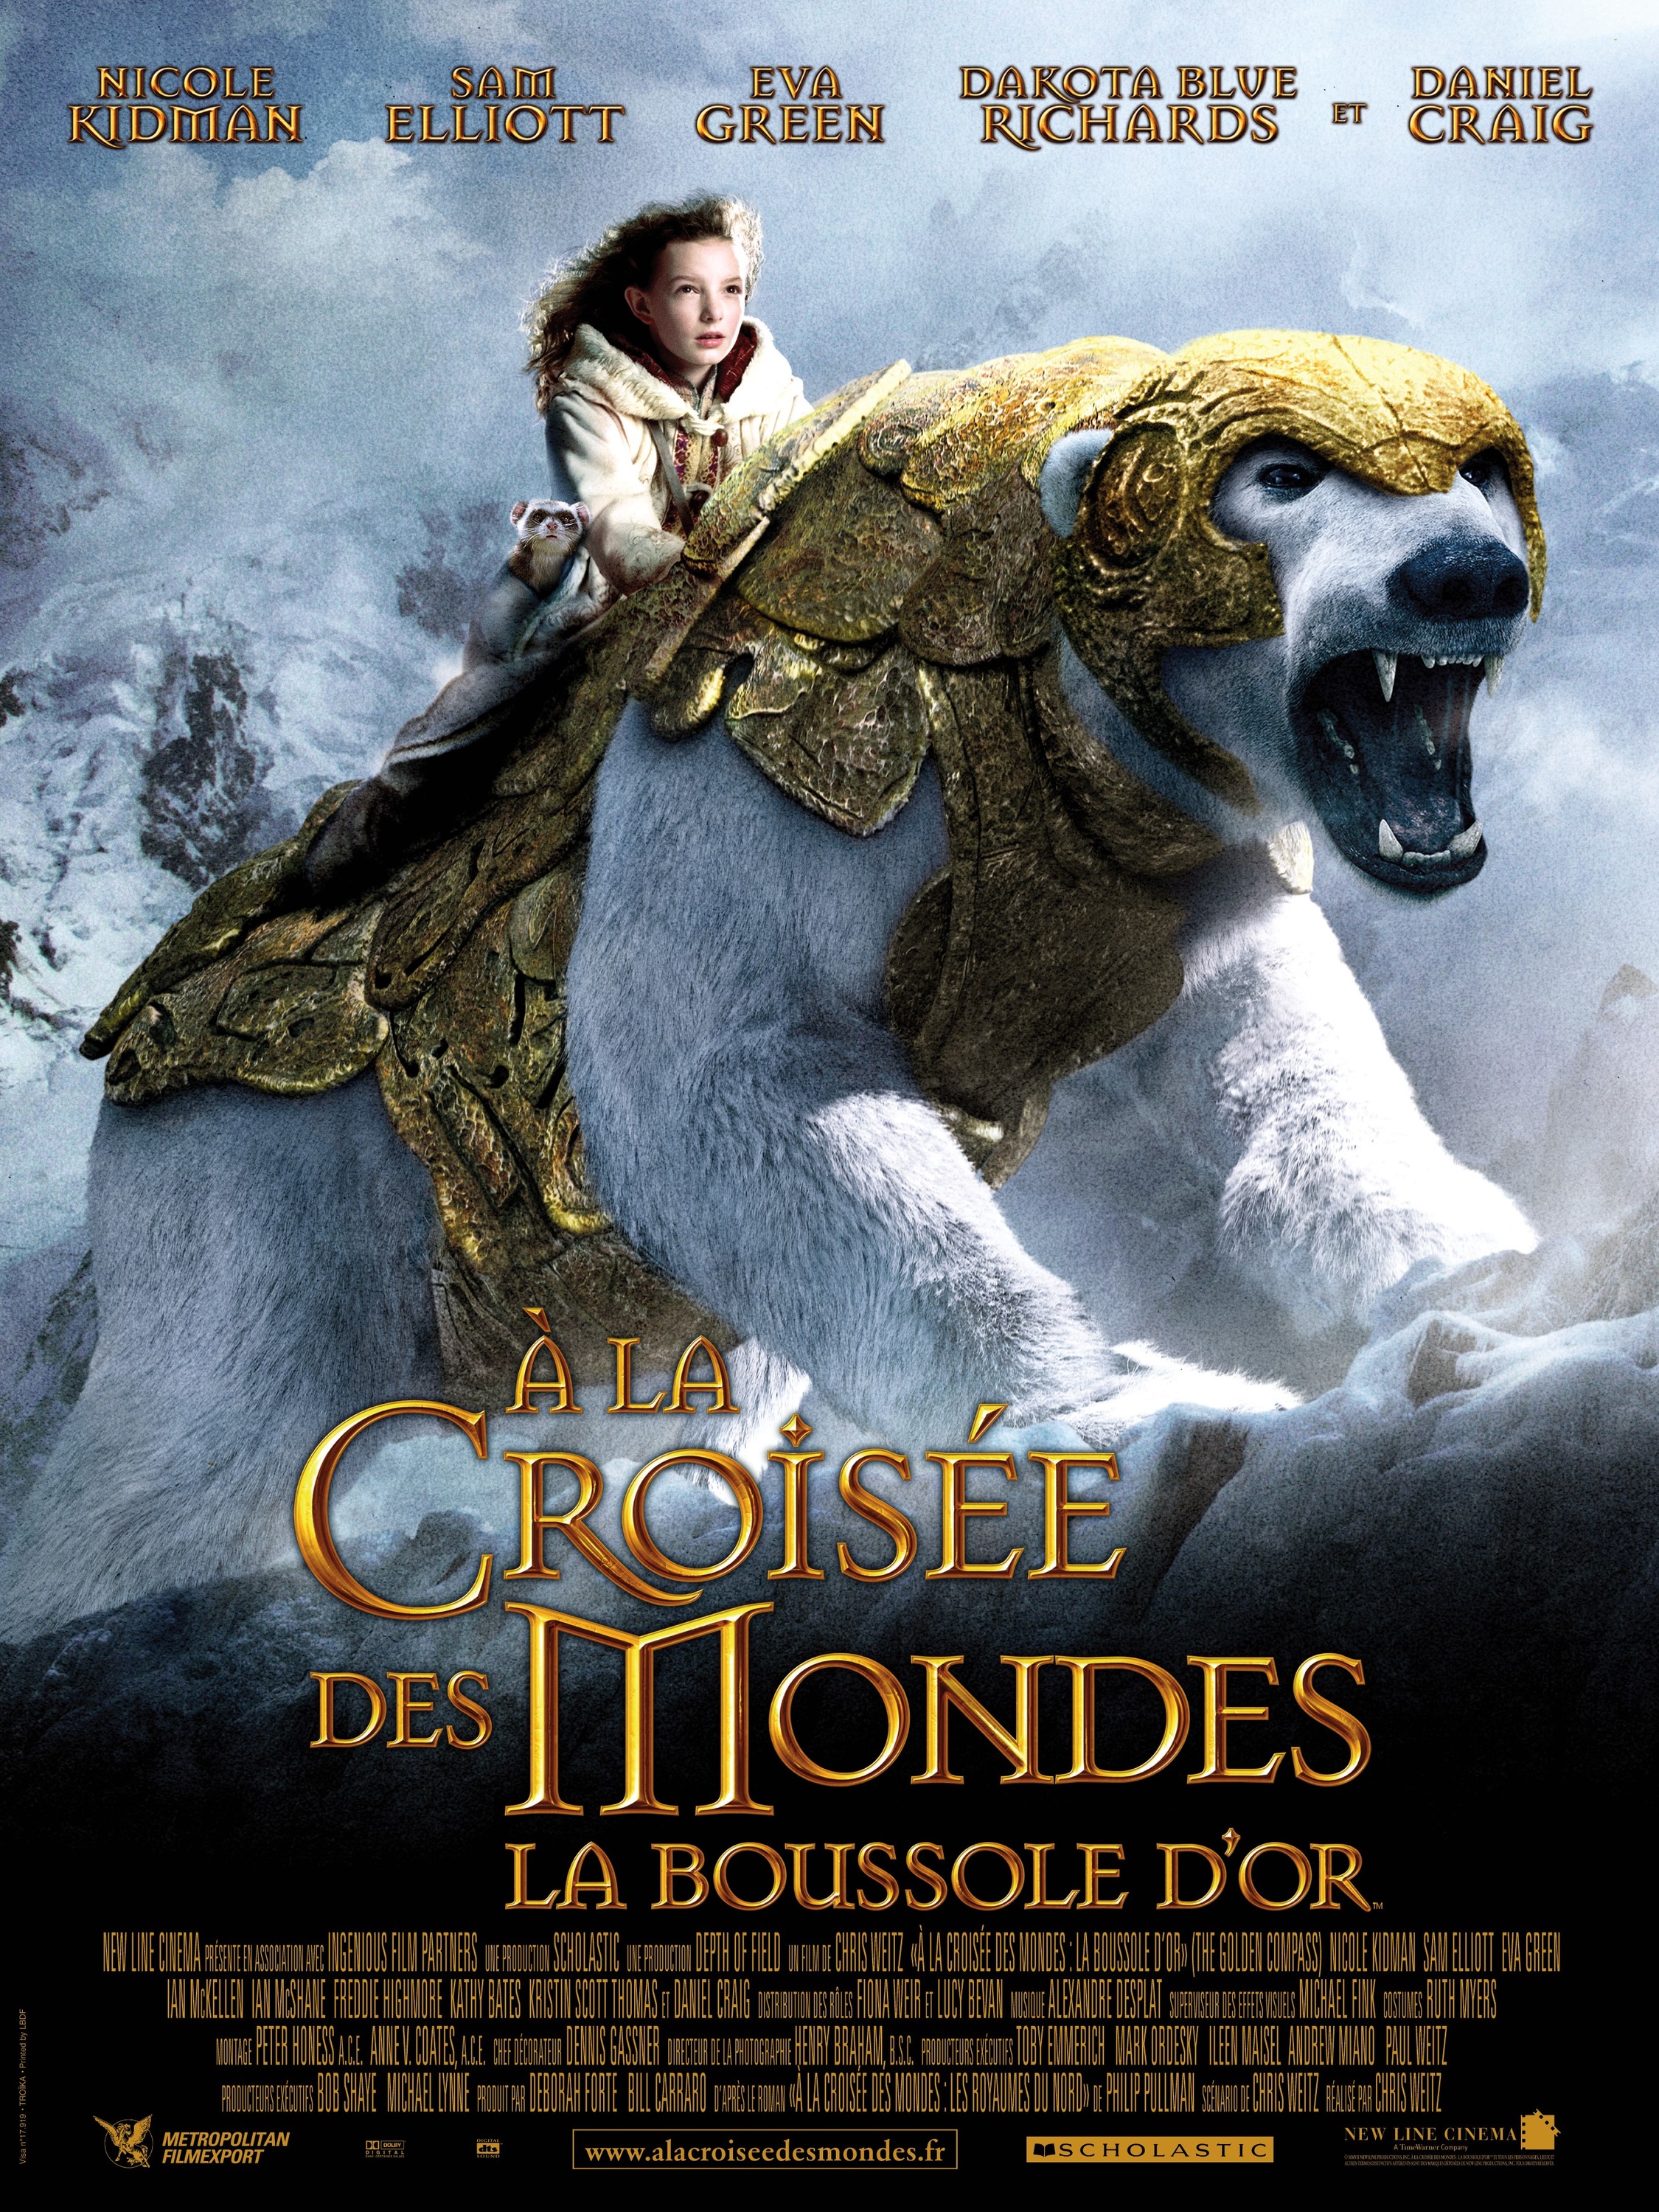 Mega Sized Movie Poster Image for The Golden Compass (#9 of 27)